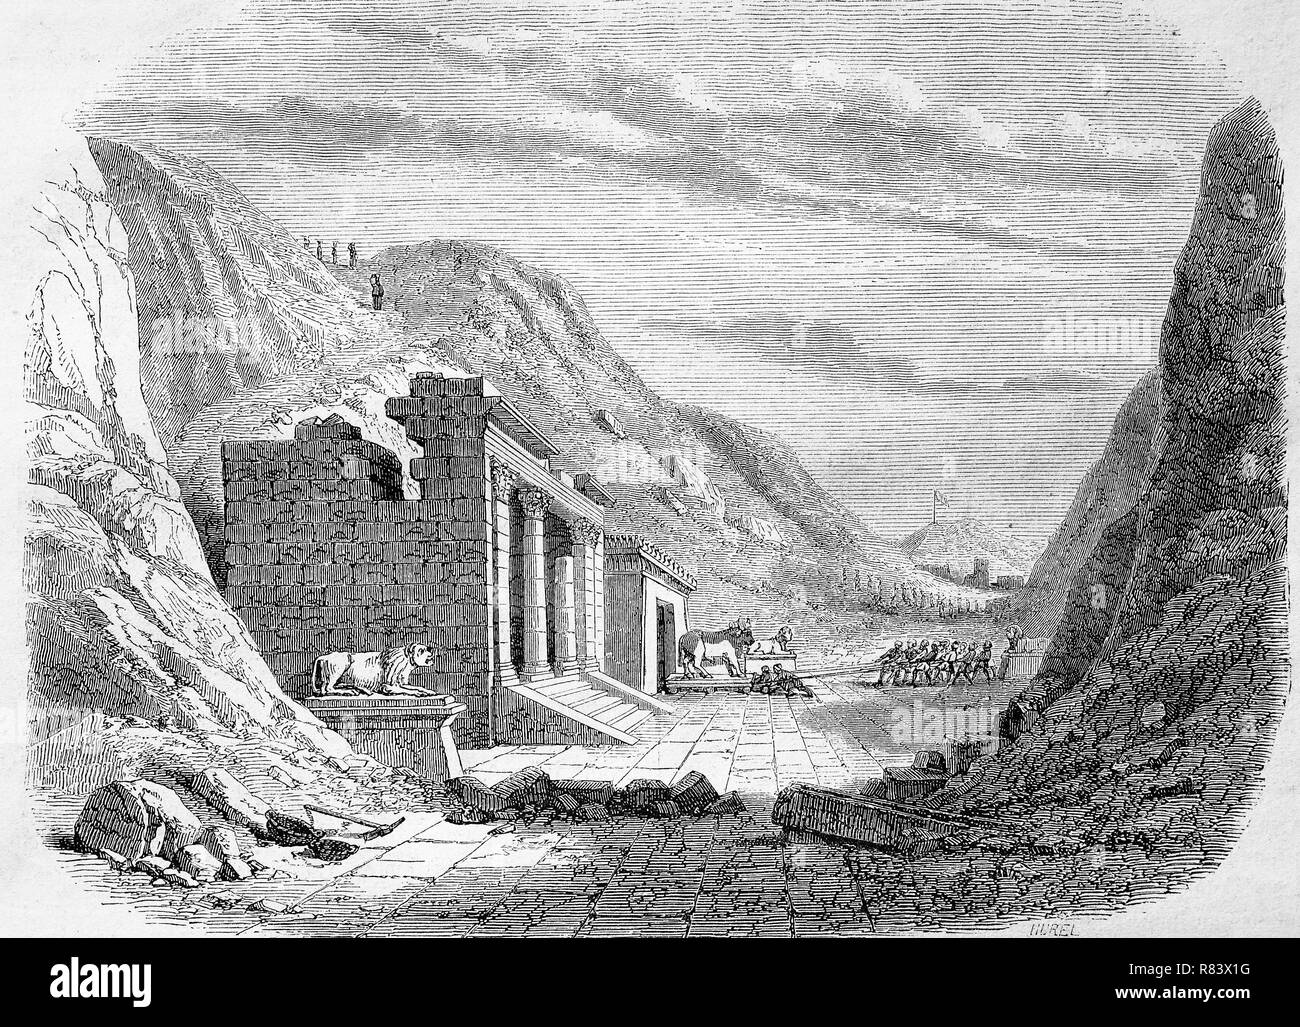 Digital improved reproduction, Serapeum at Memphi, the ancient capital of Aneb-Hetch, the first nome of Lower Egypt, Das Serapeum in Memphis, Ägypten, from an original print from the year 1855 Stock Photo